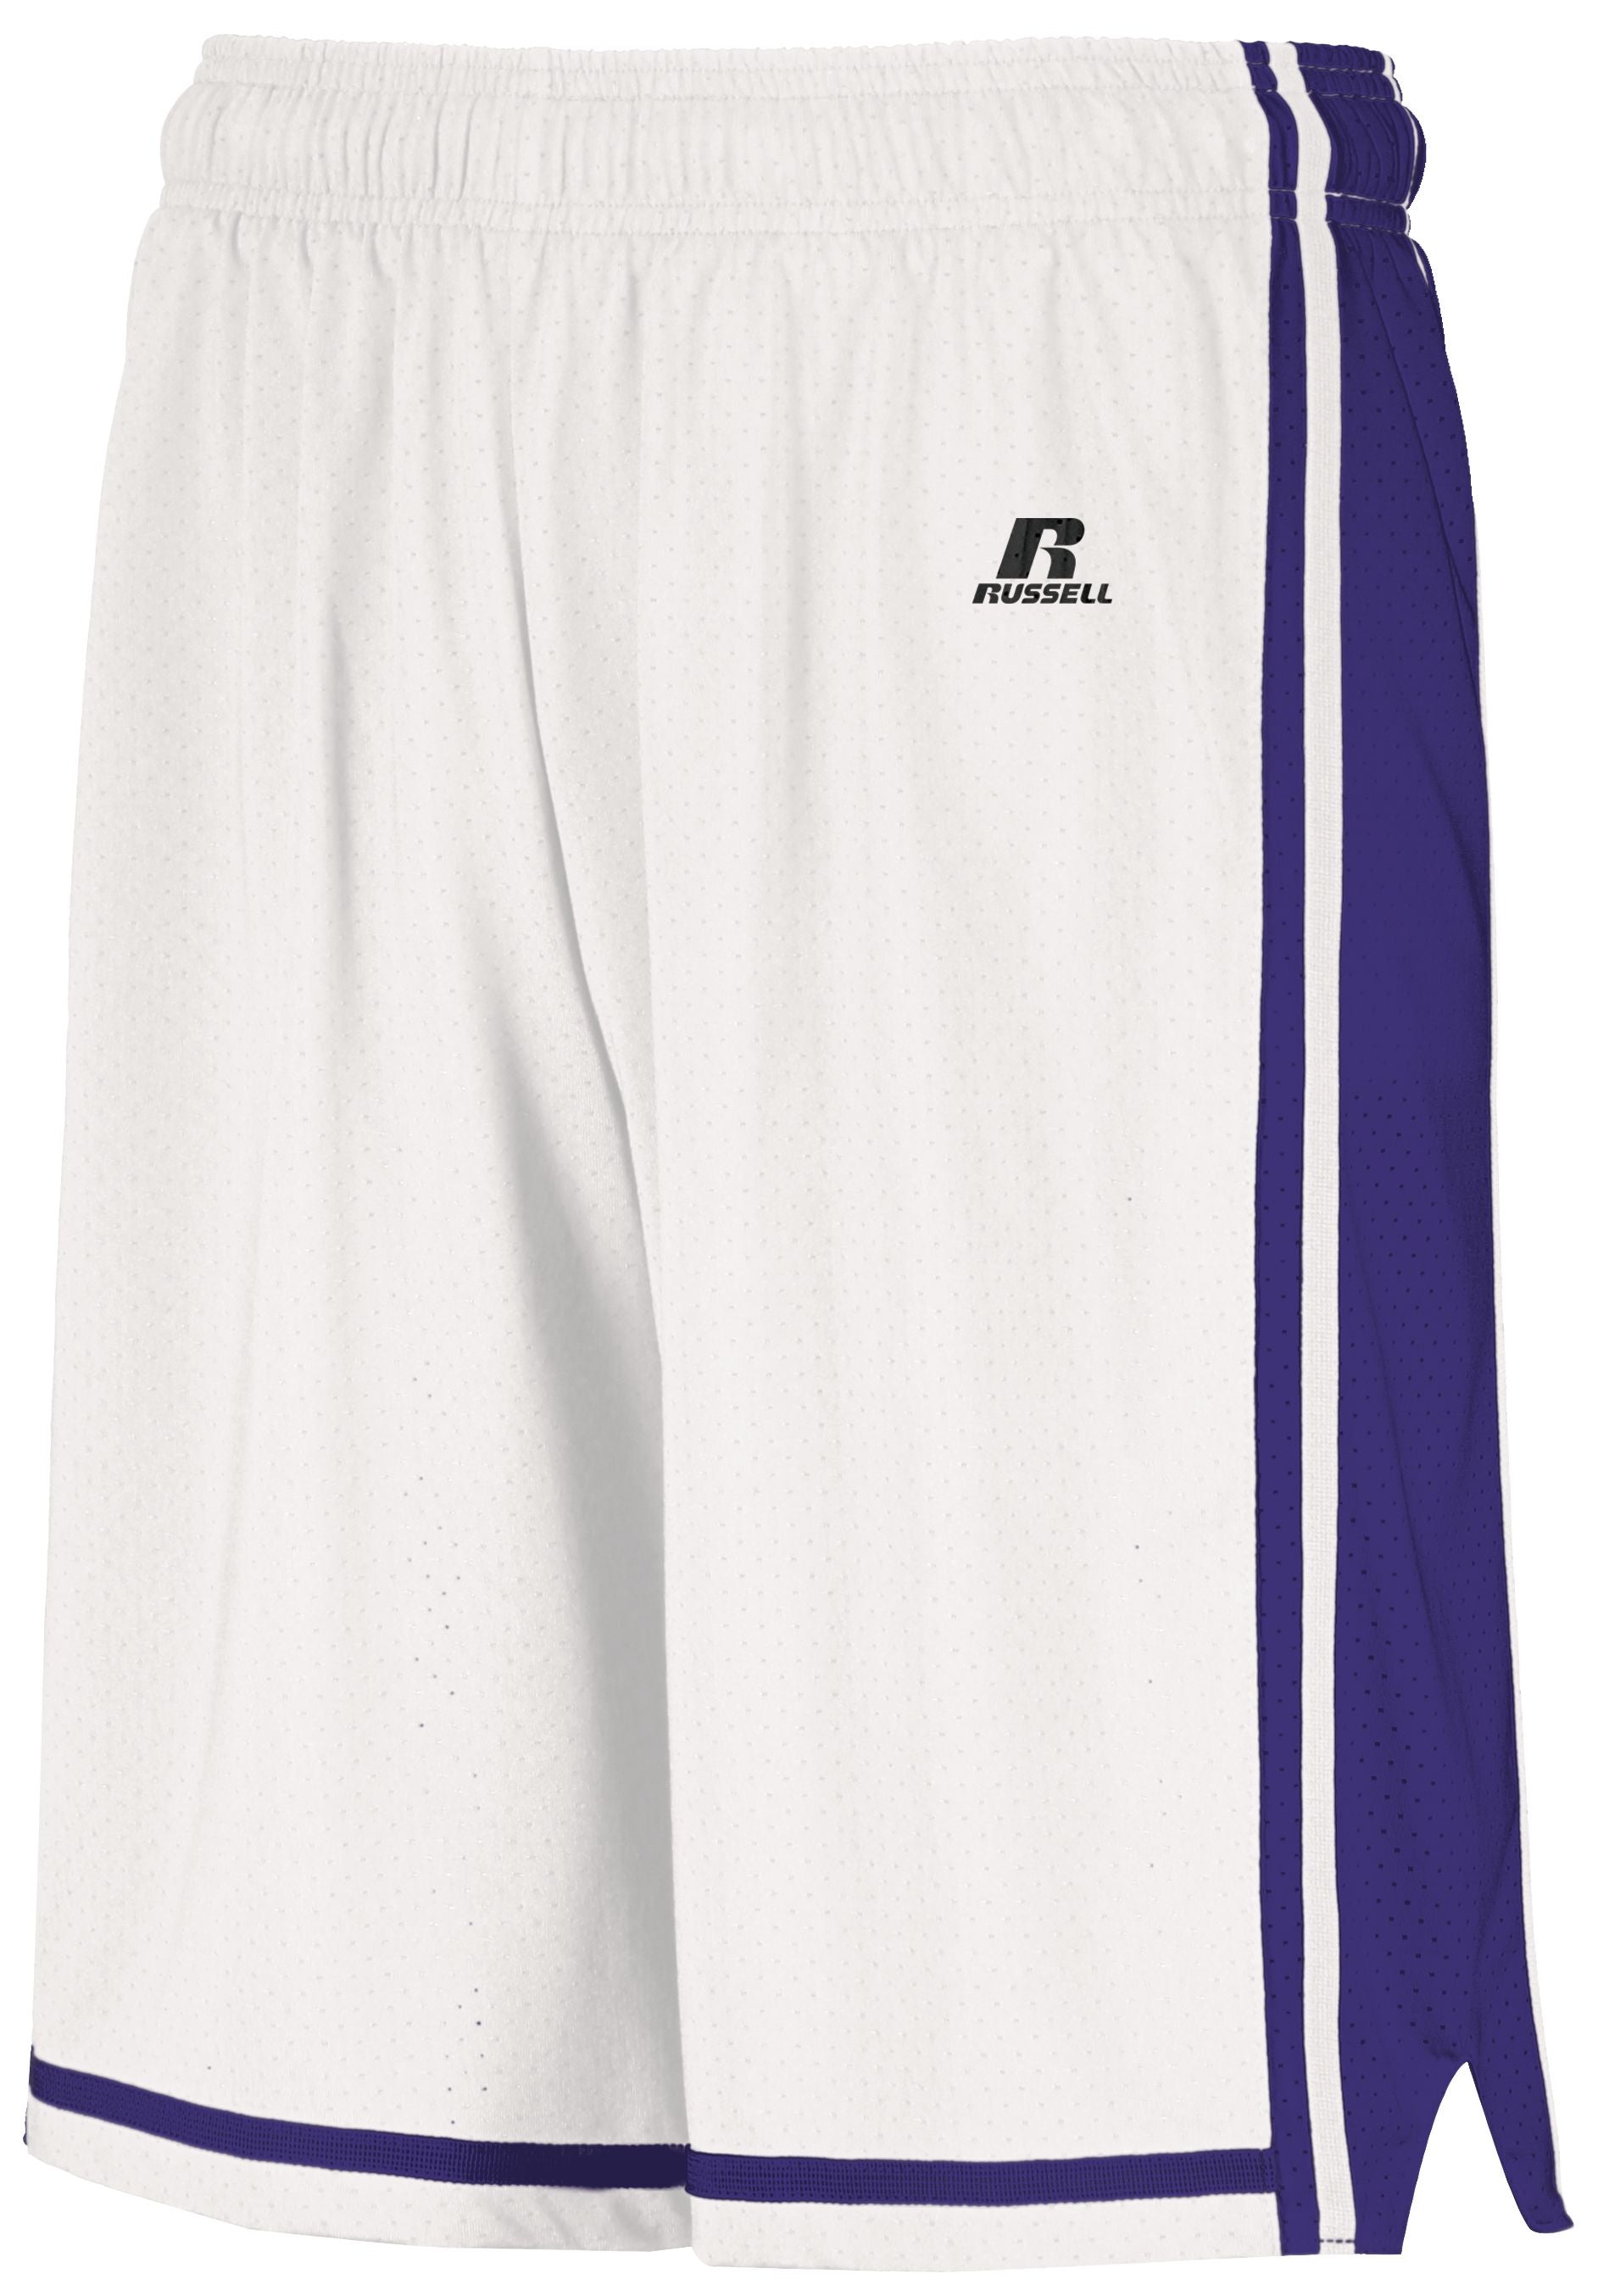 Russell Athletic Youth Legacy Basketball Shorts in White/Purple  -Part of the Youth, Youth-Shorts, Basketball, Russell-Athletic-Products, All-Sports, All-Sports-1 product lines at KanaleyCreations.com